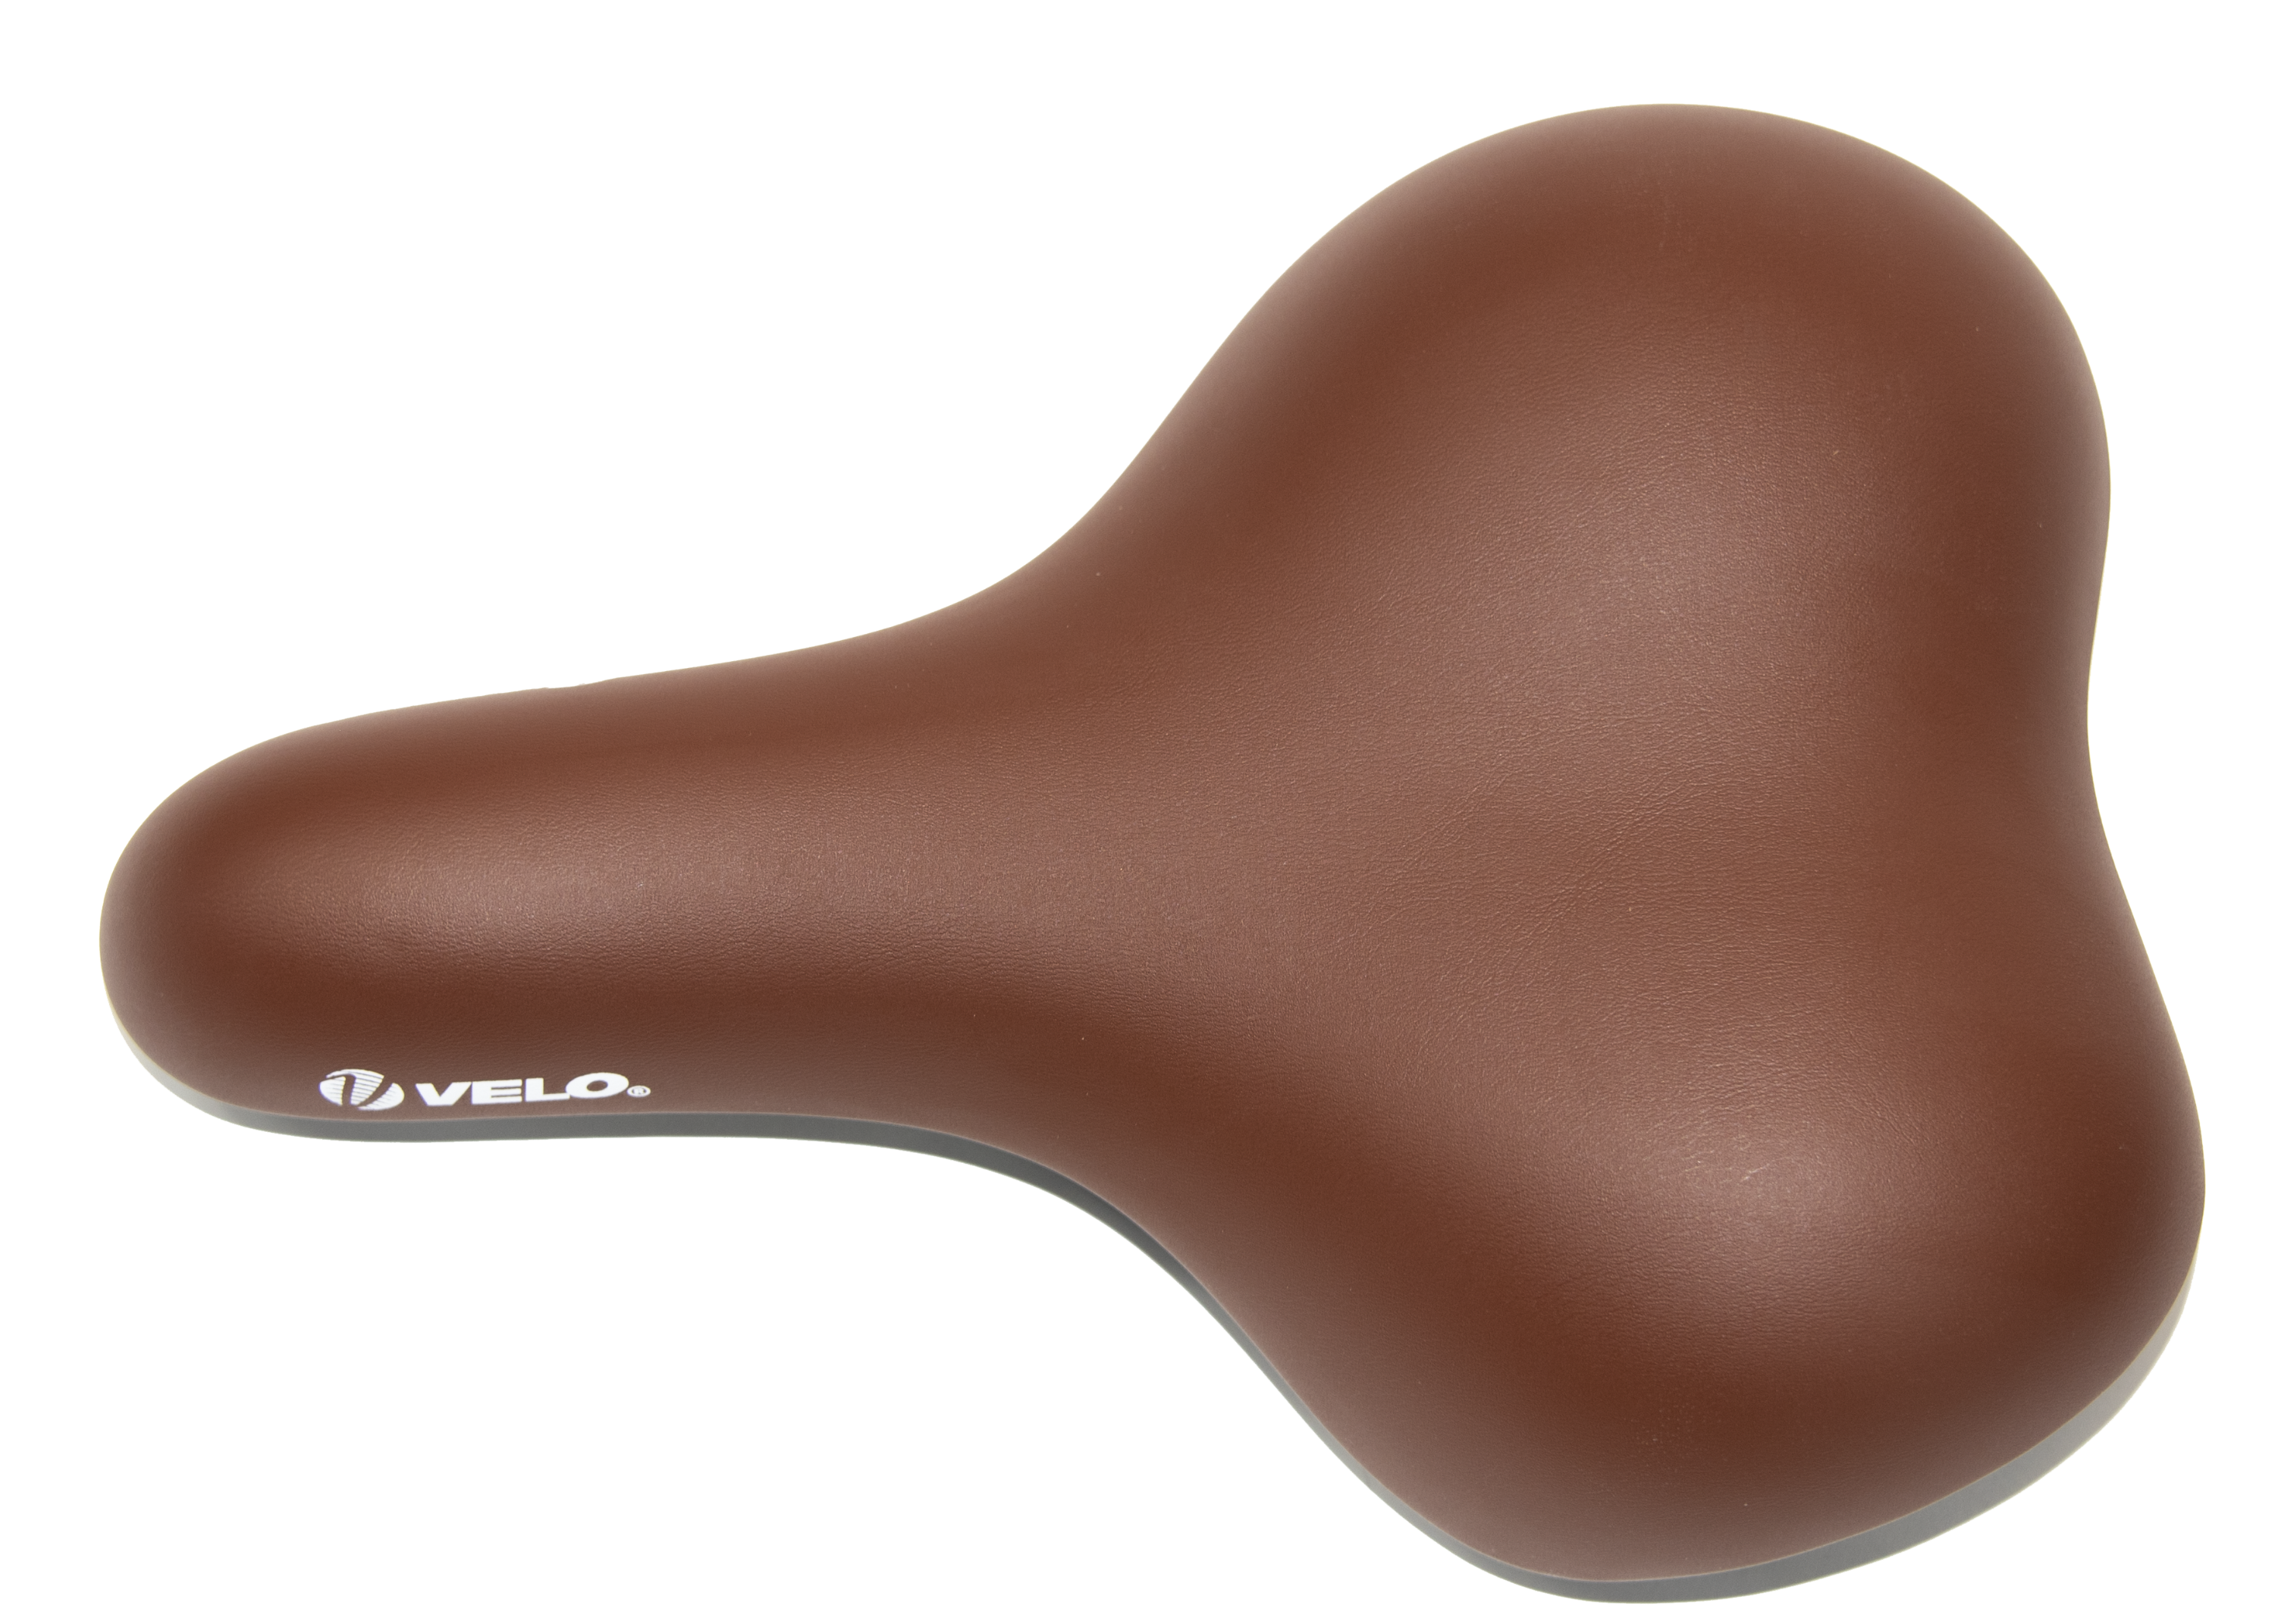 euphree city robin velo saddle replacement in the color brown.